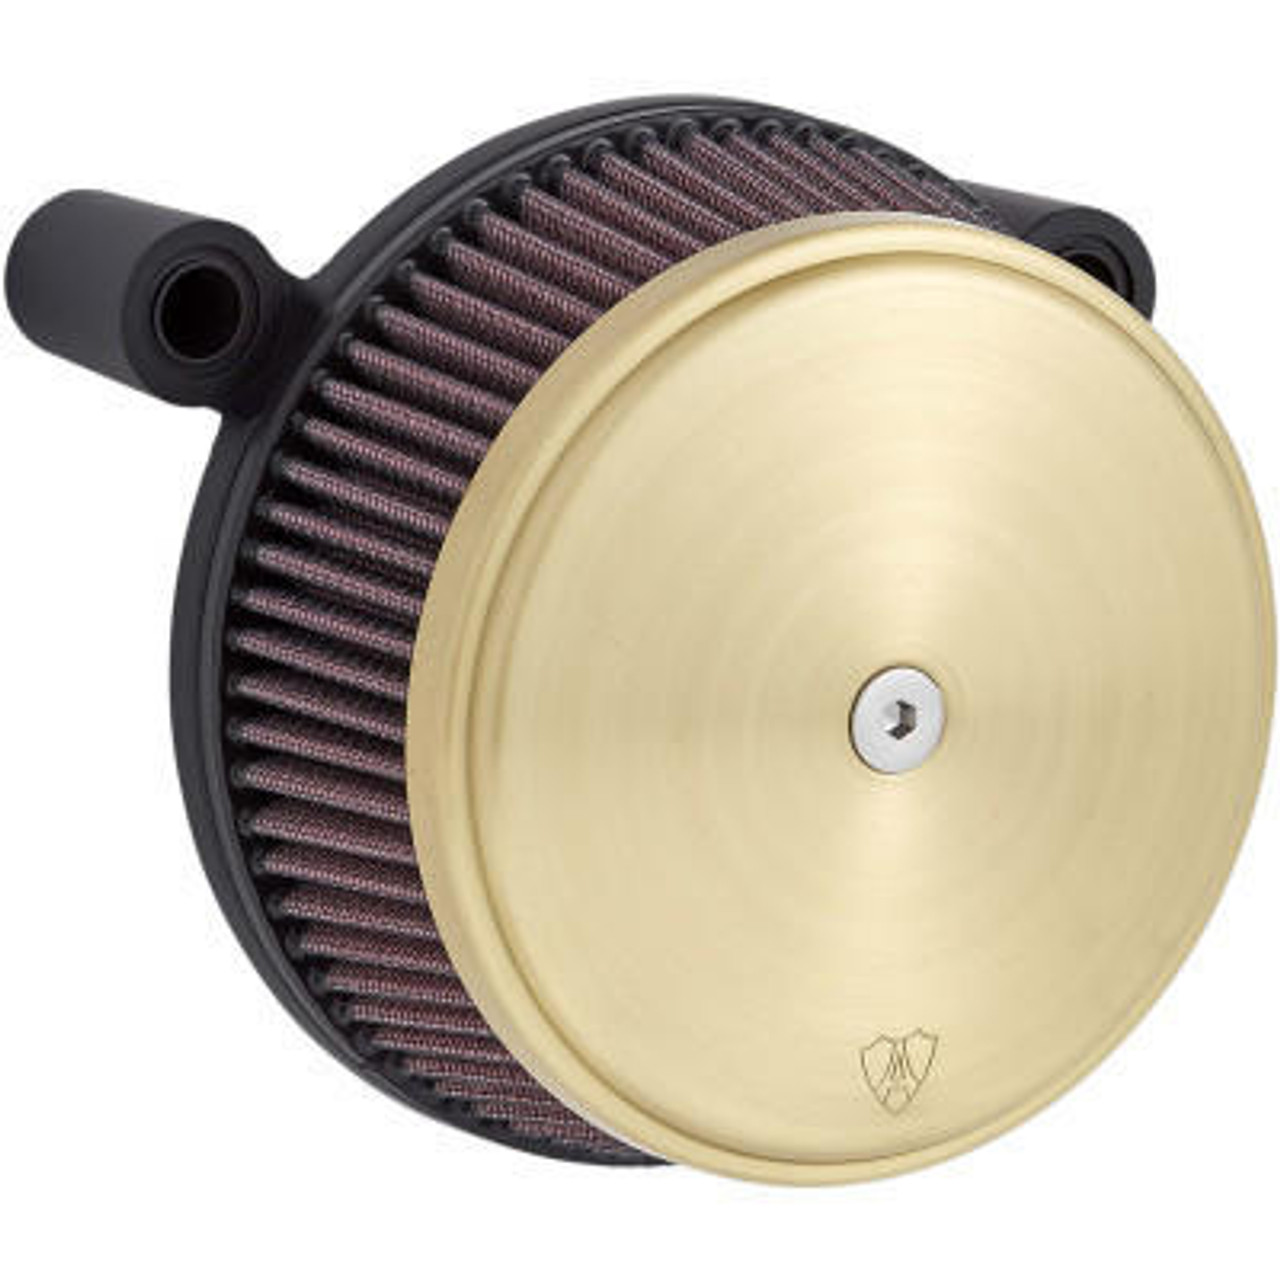 Arlen Ness - Stage 1 Big Sucker Air Cleaner Kit Brass fits '01-'17 Twin Cam  EFI Models & '99-'06 CV Carb - Cable Throttle